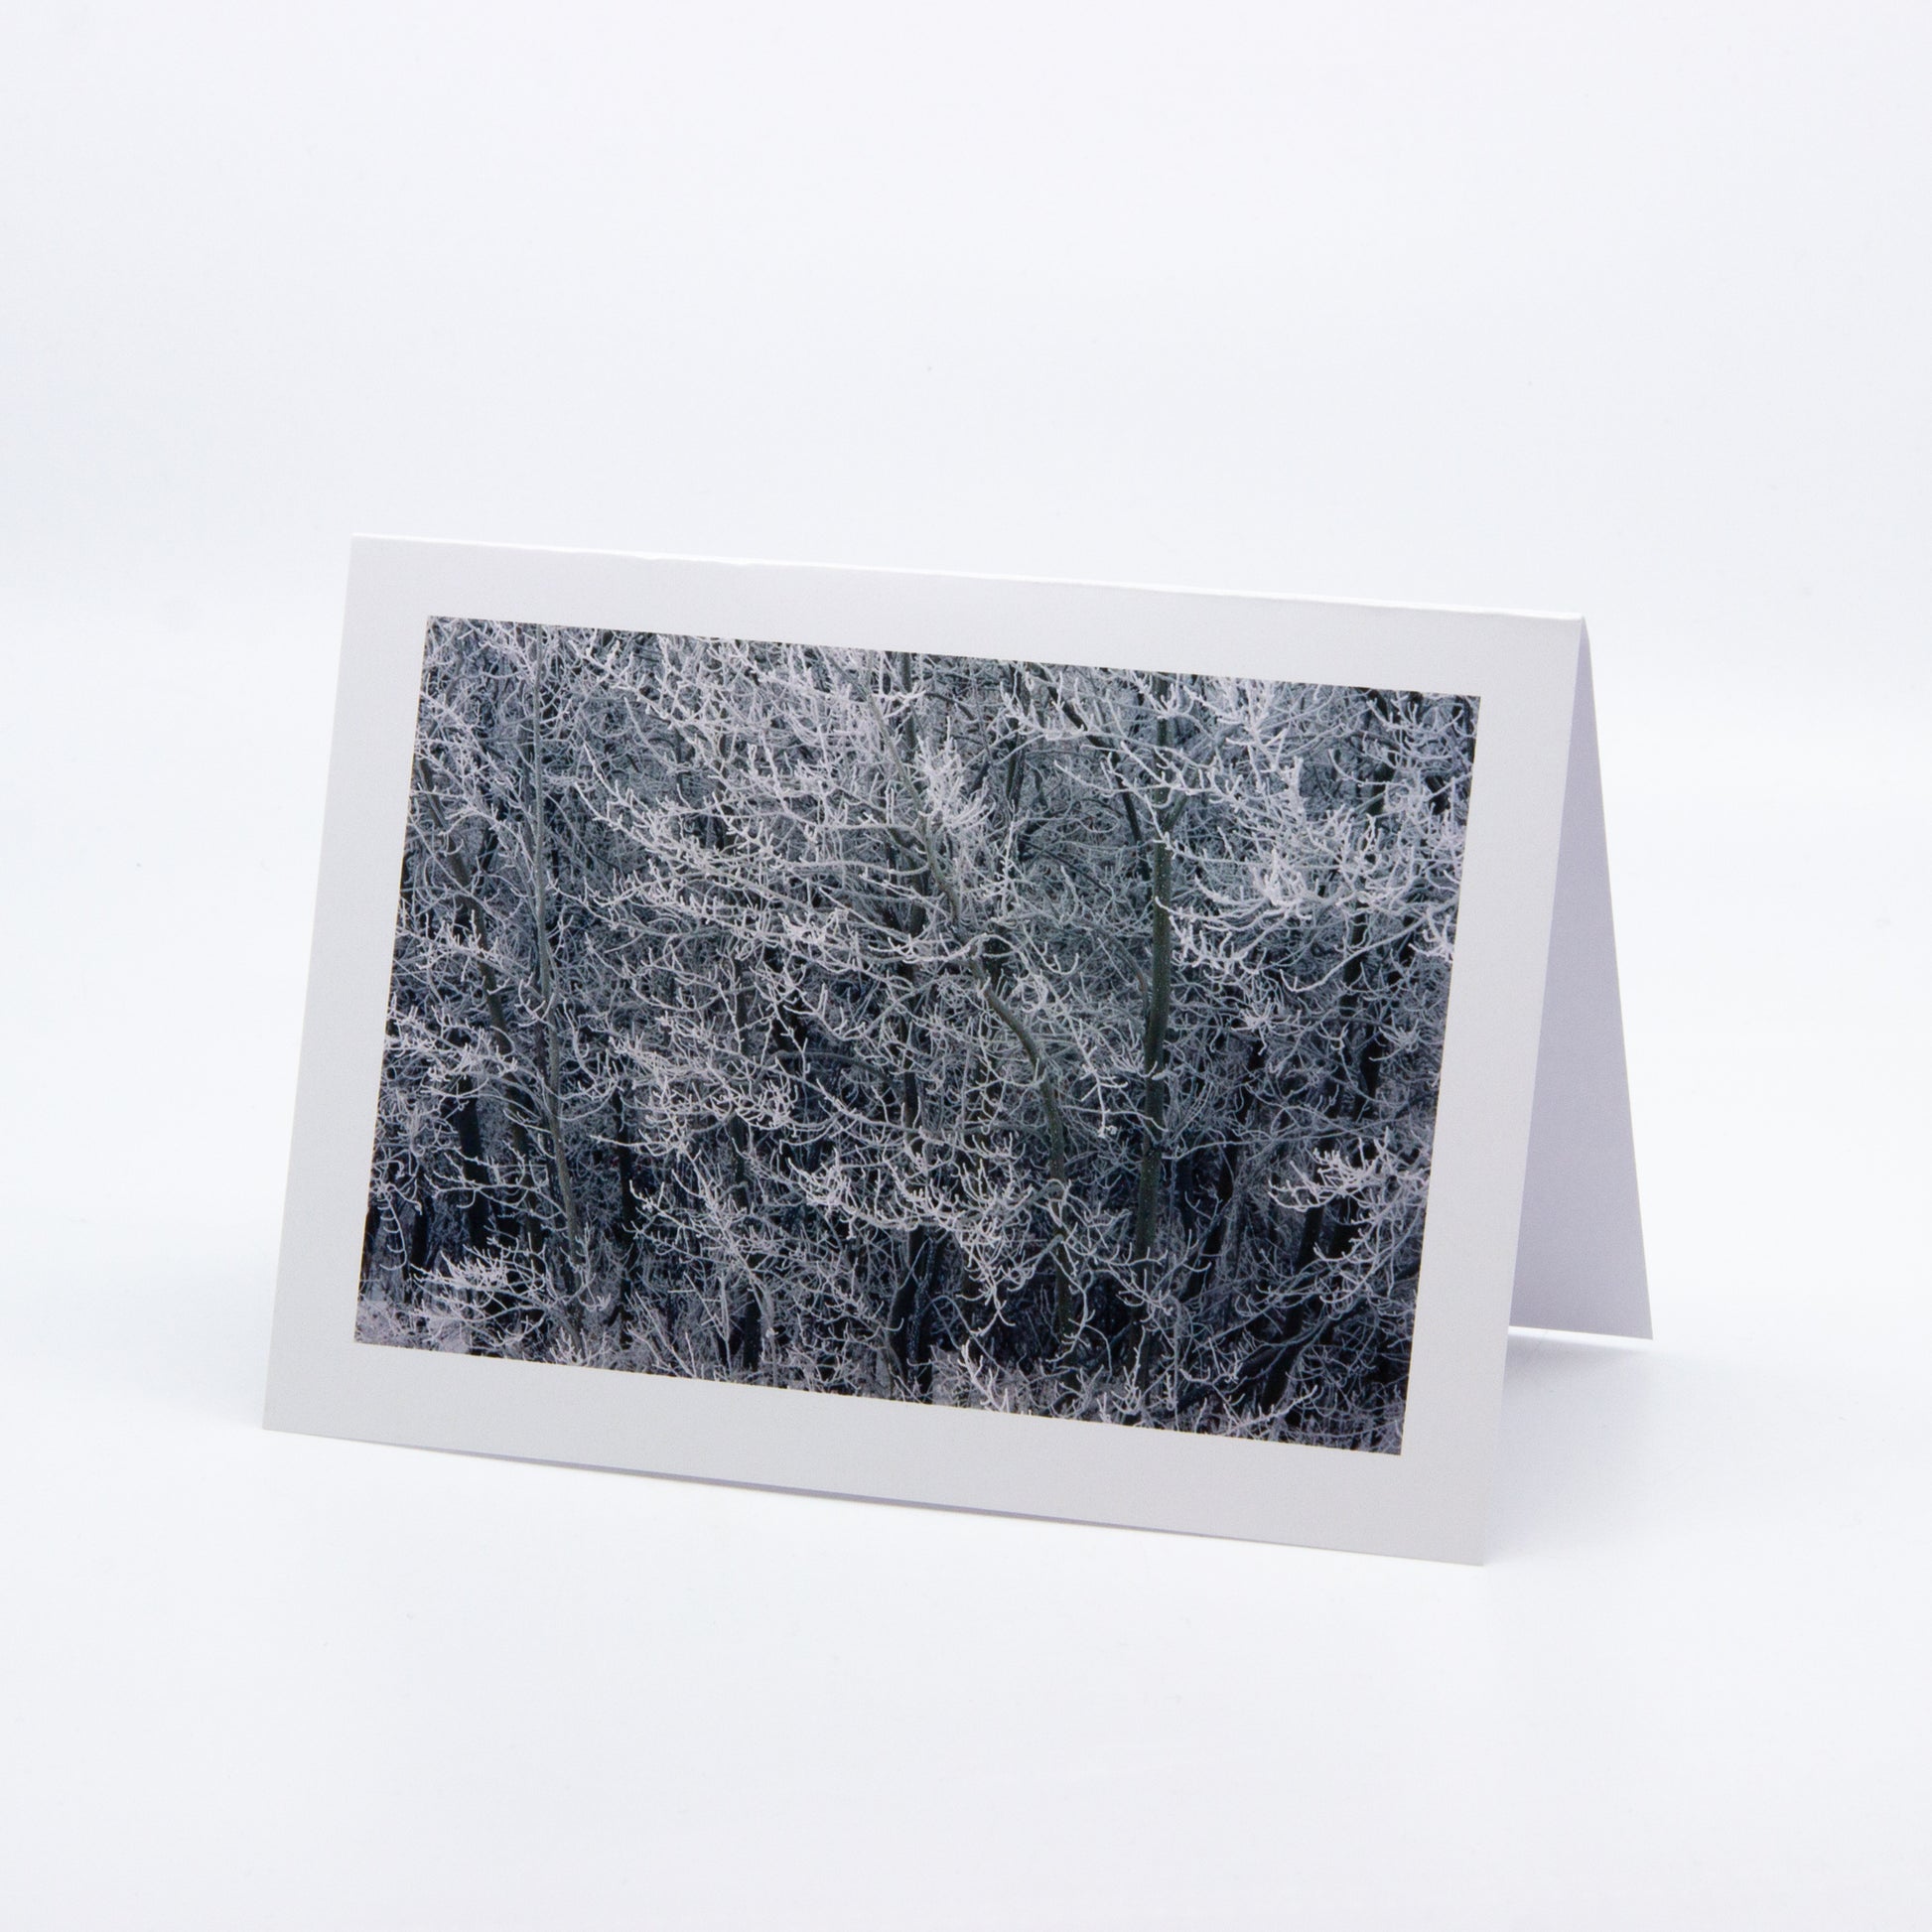 Photo art card of frosty trees